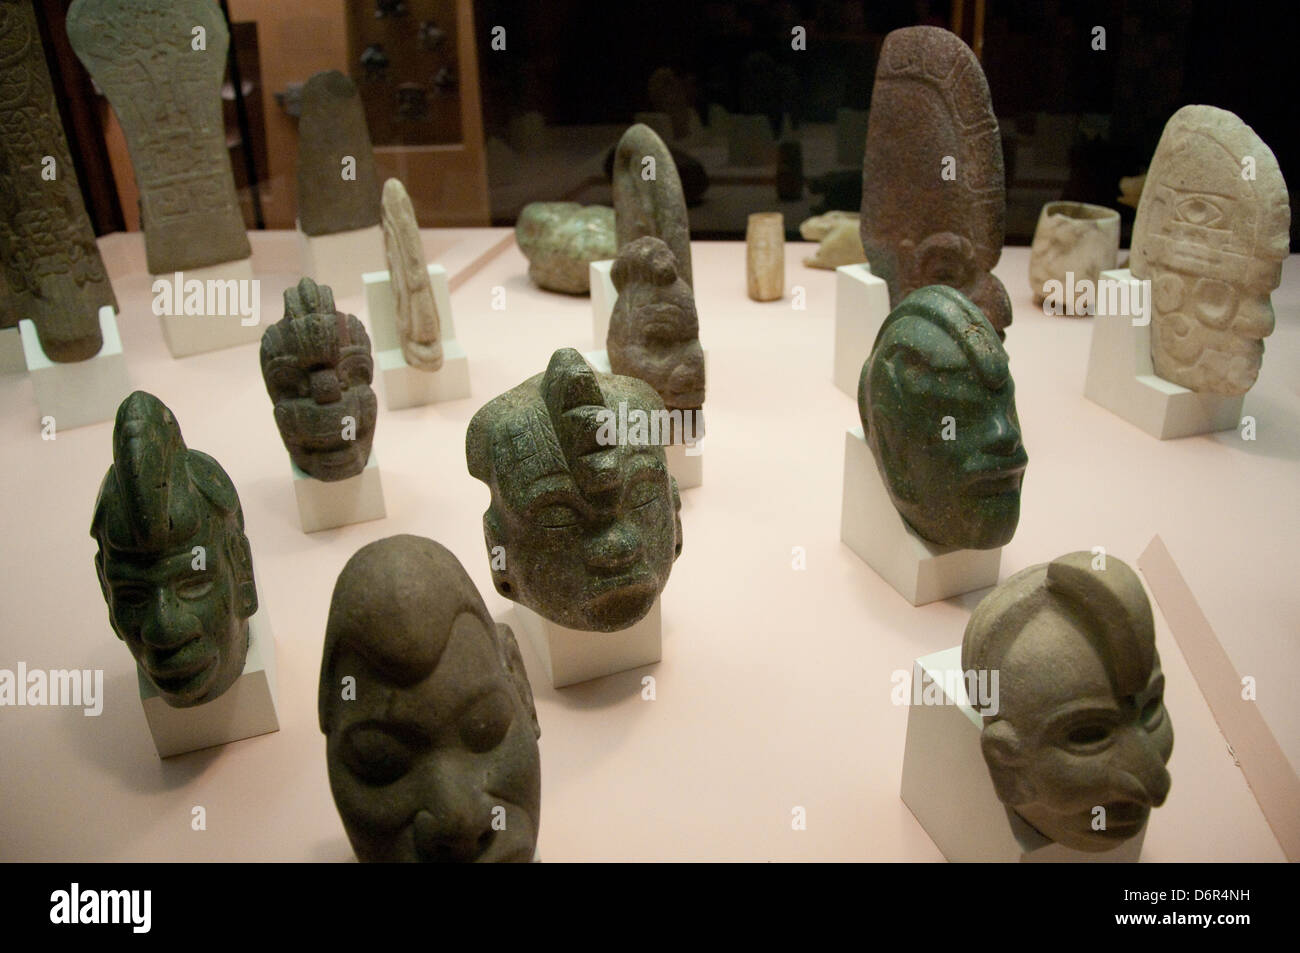 An exhibit in the Cultural Halls of the American Museum of Natural History, New York USA Stock Photo